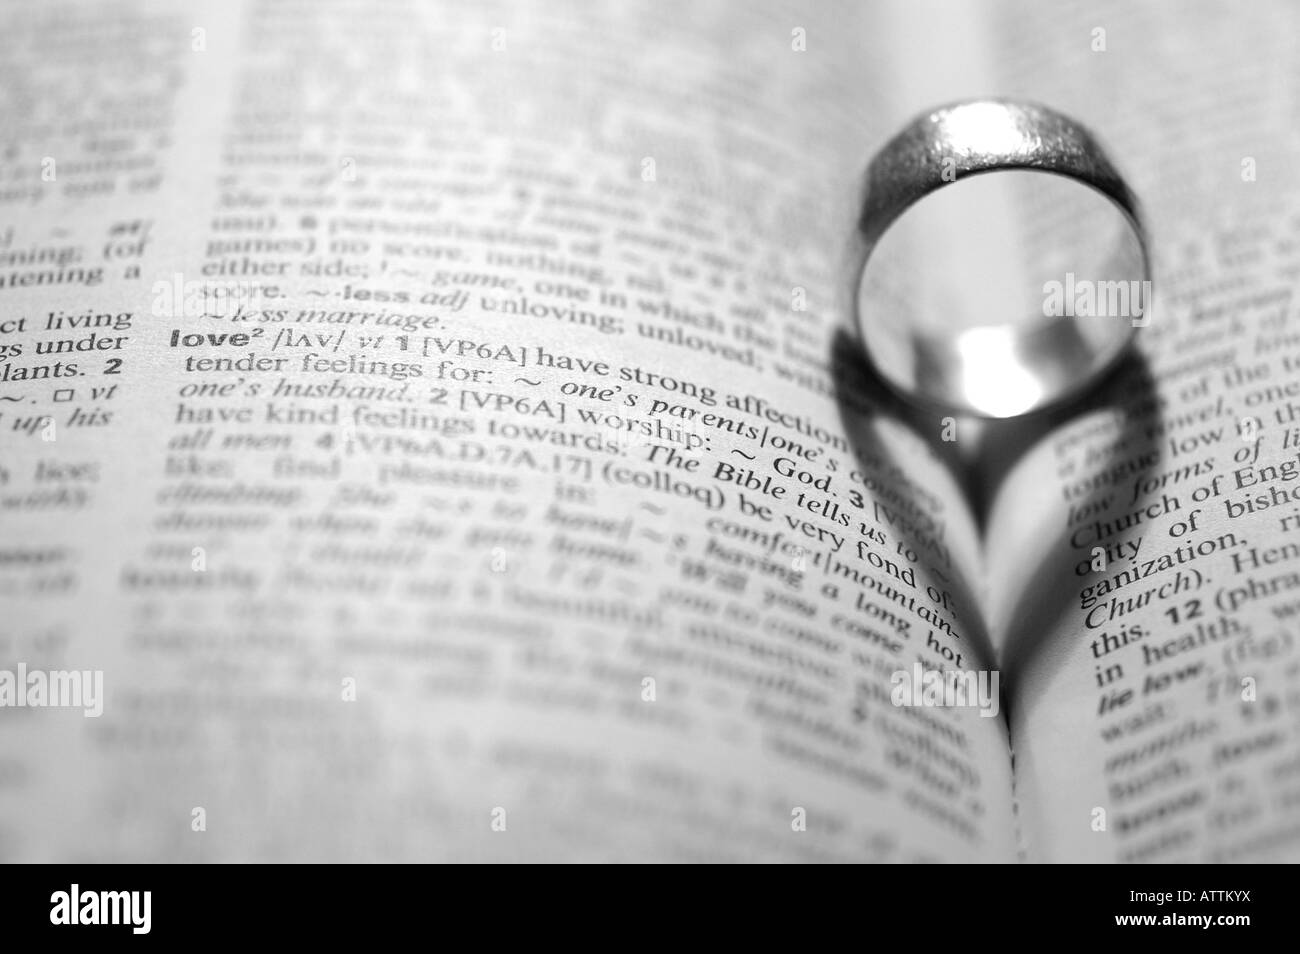 wedding ring casting a heart shaped shadow Stock Photo